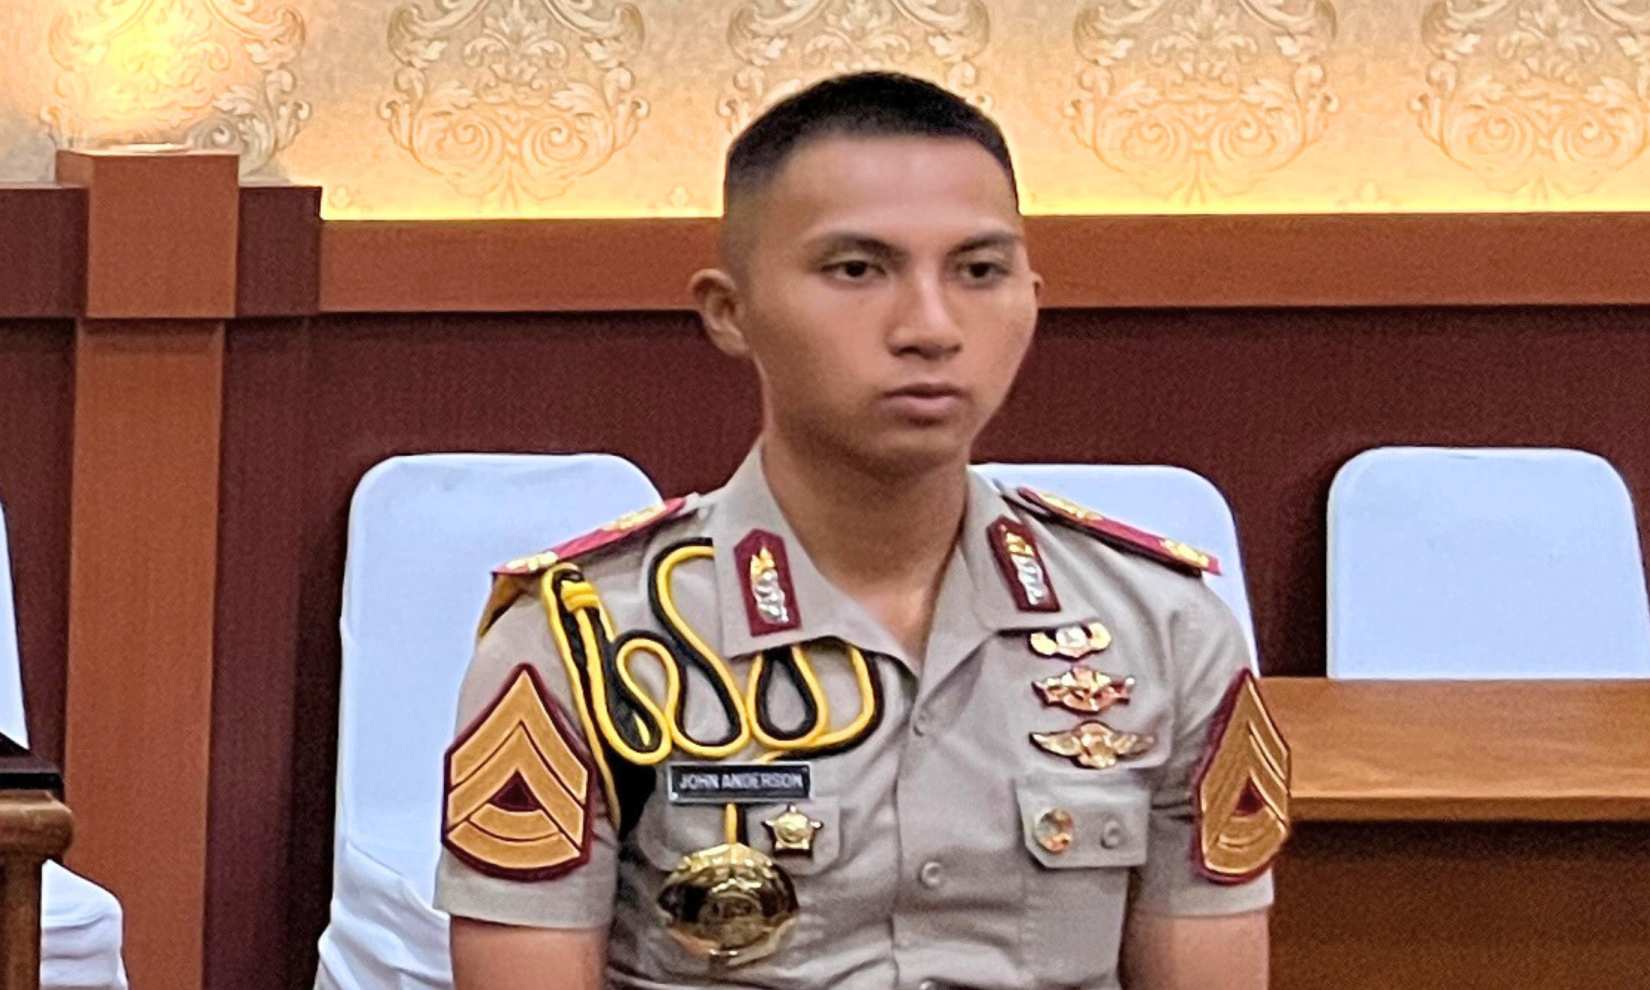 John Anderson Batara Aryasena, 2nd level cadet at the Indonesian Police Academy, won 3rd place in the UNODC Essay Competition on Police Integrity.